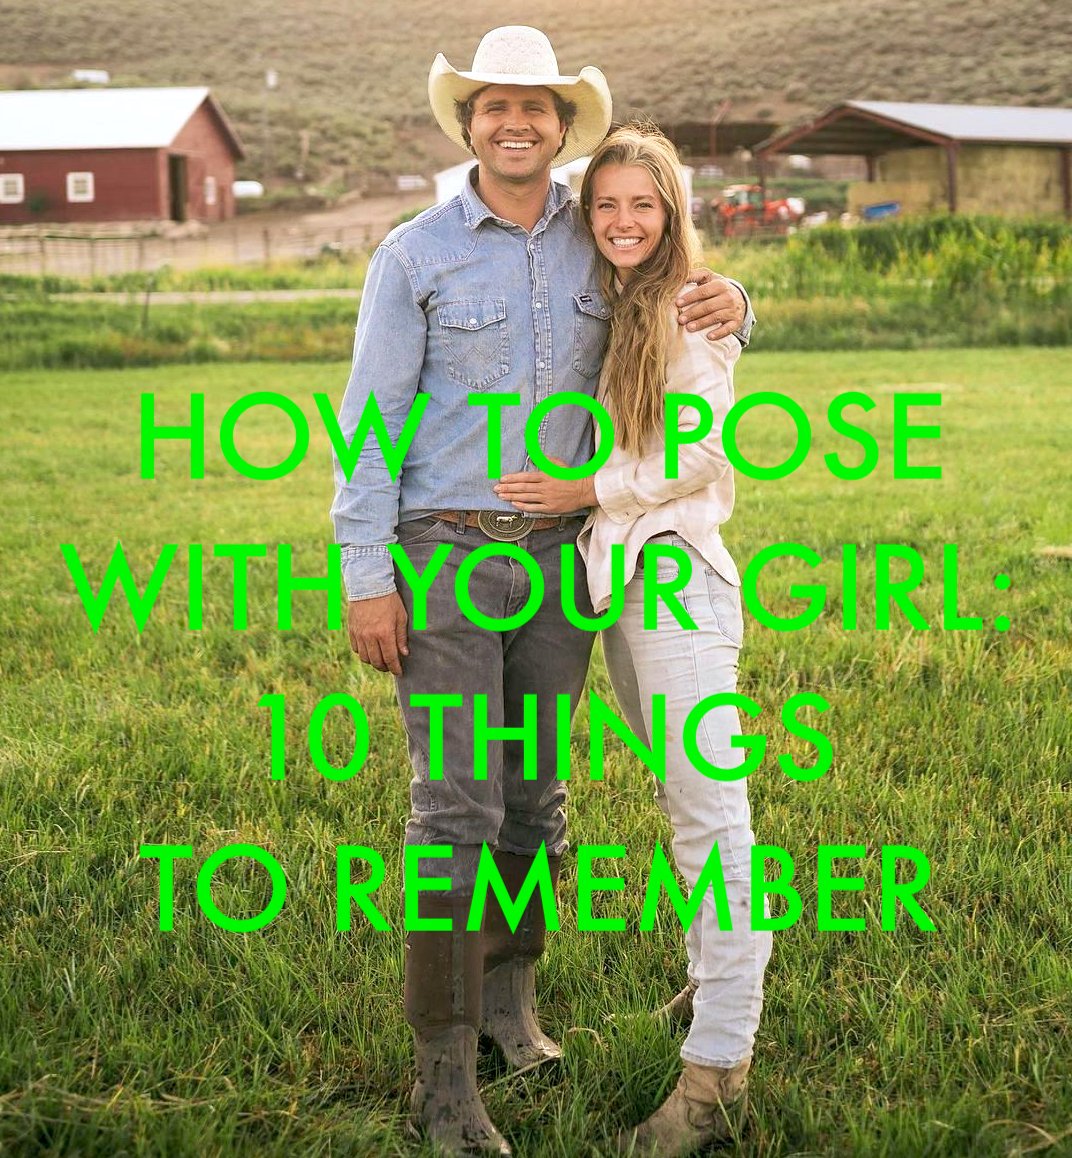 HOW TO POSE FOR A PHOTO WITH YOUR GIRL: Here are 10 things to remember Initially, you may have trouble remembering all of them, but over time it will become second nature